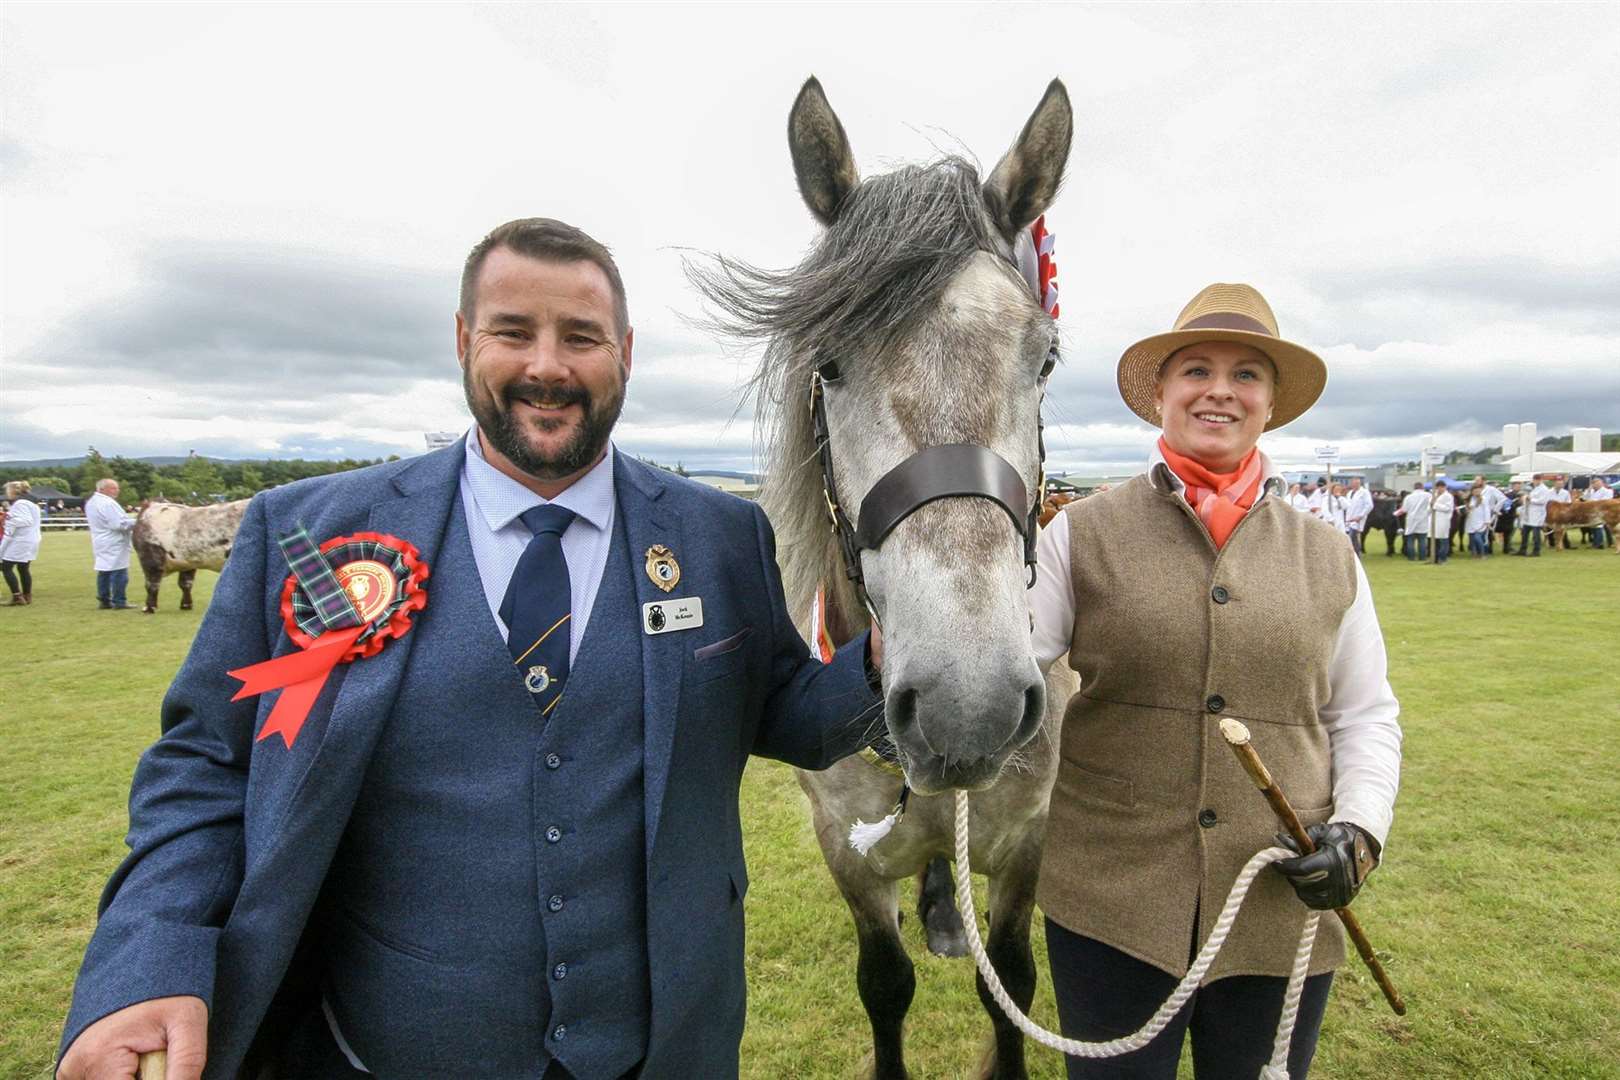 Black Isle Show president Jock McKenzie with this year's champion of champions, McGregor of Millfeld, a Highland Pony shown by Sara-Jane Forbes. Photo: Marc Hindley/Black Isle Show